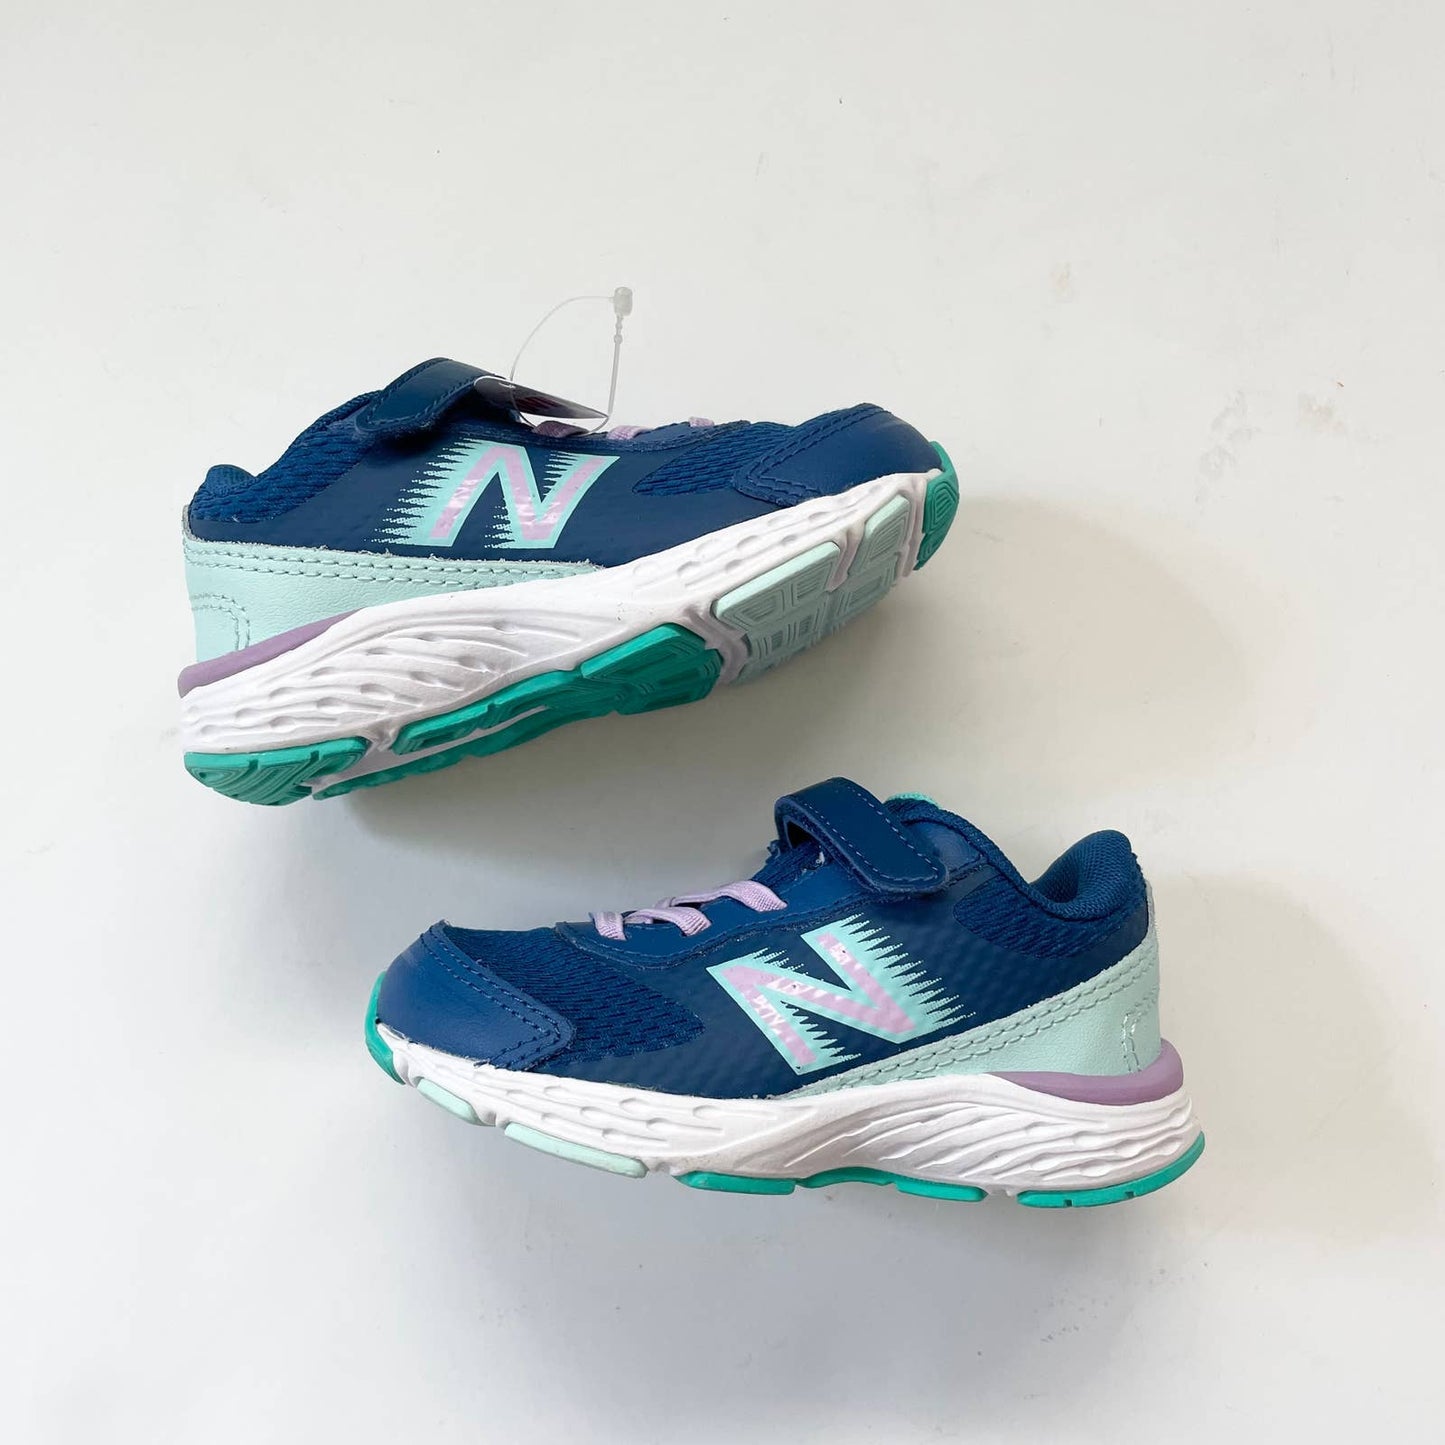 New Balance 680 v6 Kids Toddler 6 Extra Wide XW Sneakers